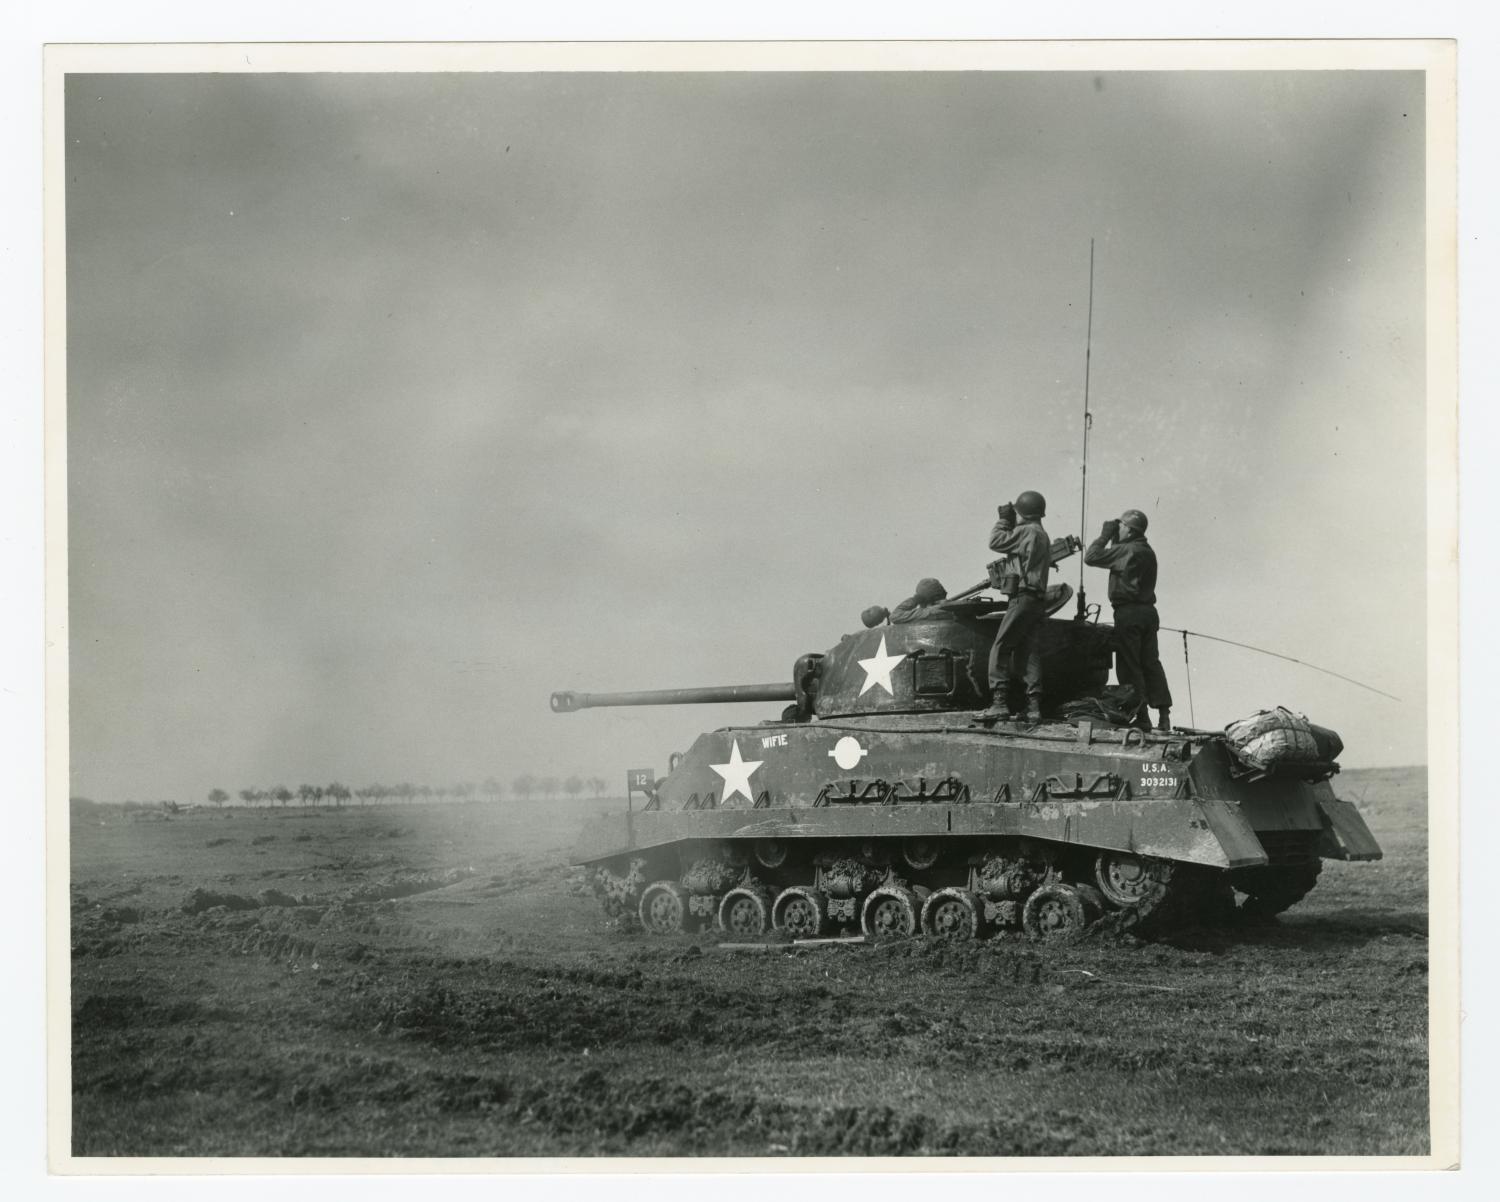 [Soldiers Test Firing an M4 Tank] - The Portal to Texas History